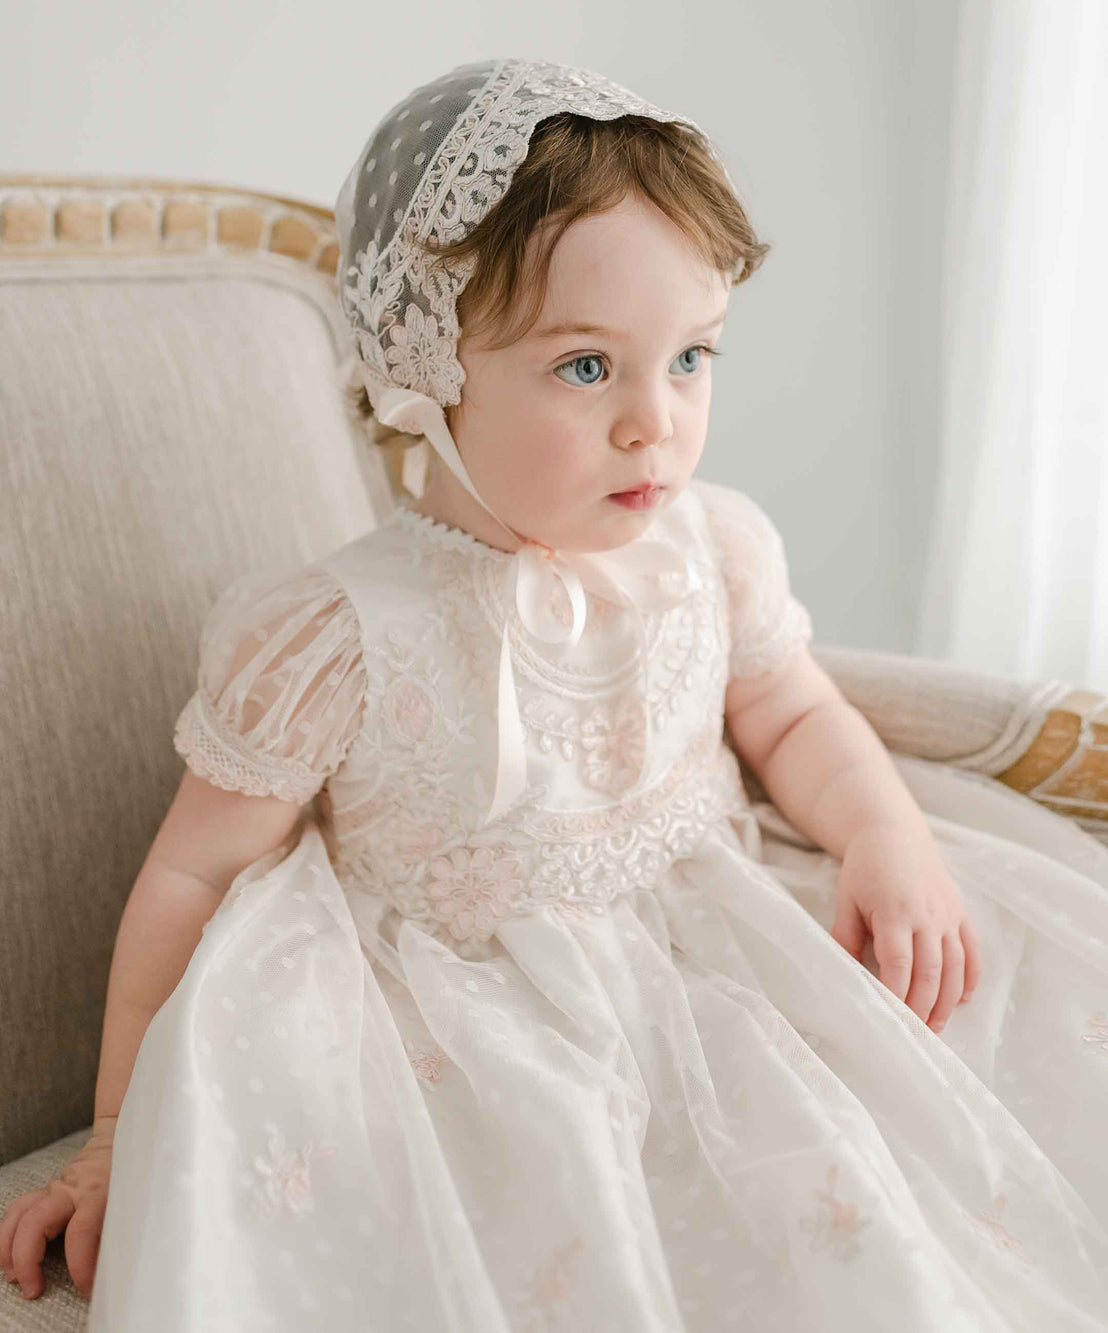 A baby girl with wide blue eyes sits on a beige sofa, wearing the Elizabeth Christening Gown & Bonnet, looking slightly off-camera.